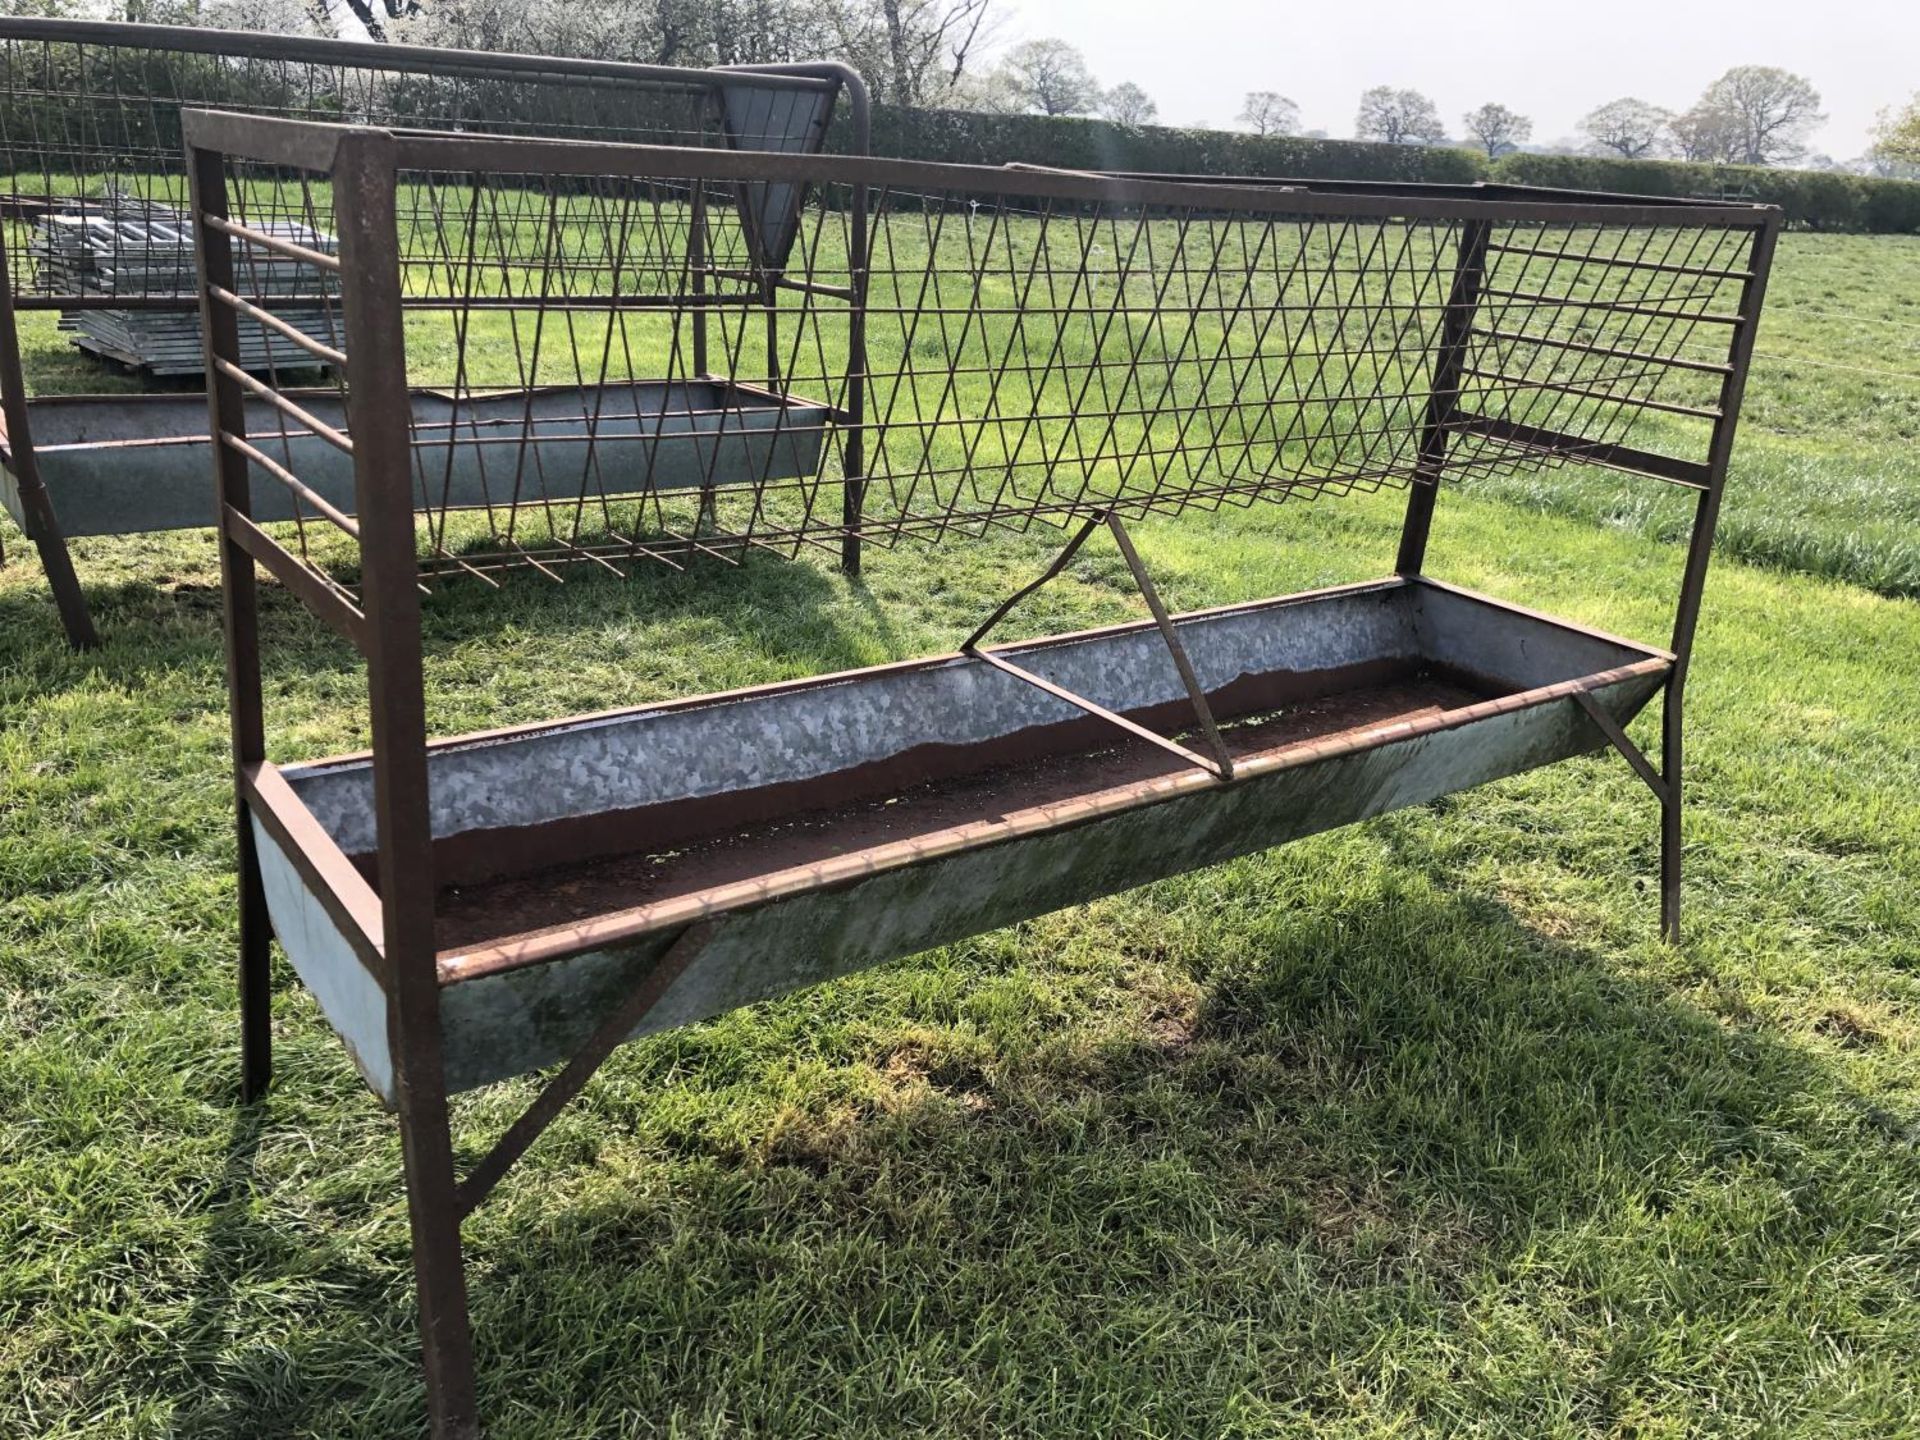 A LARGE GALVANISED FEED TROUGH WITH MANGER